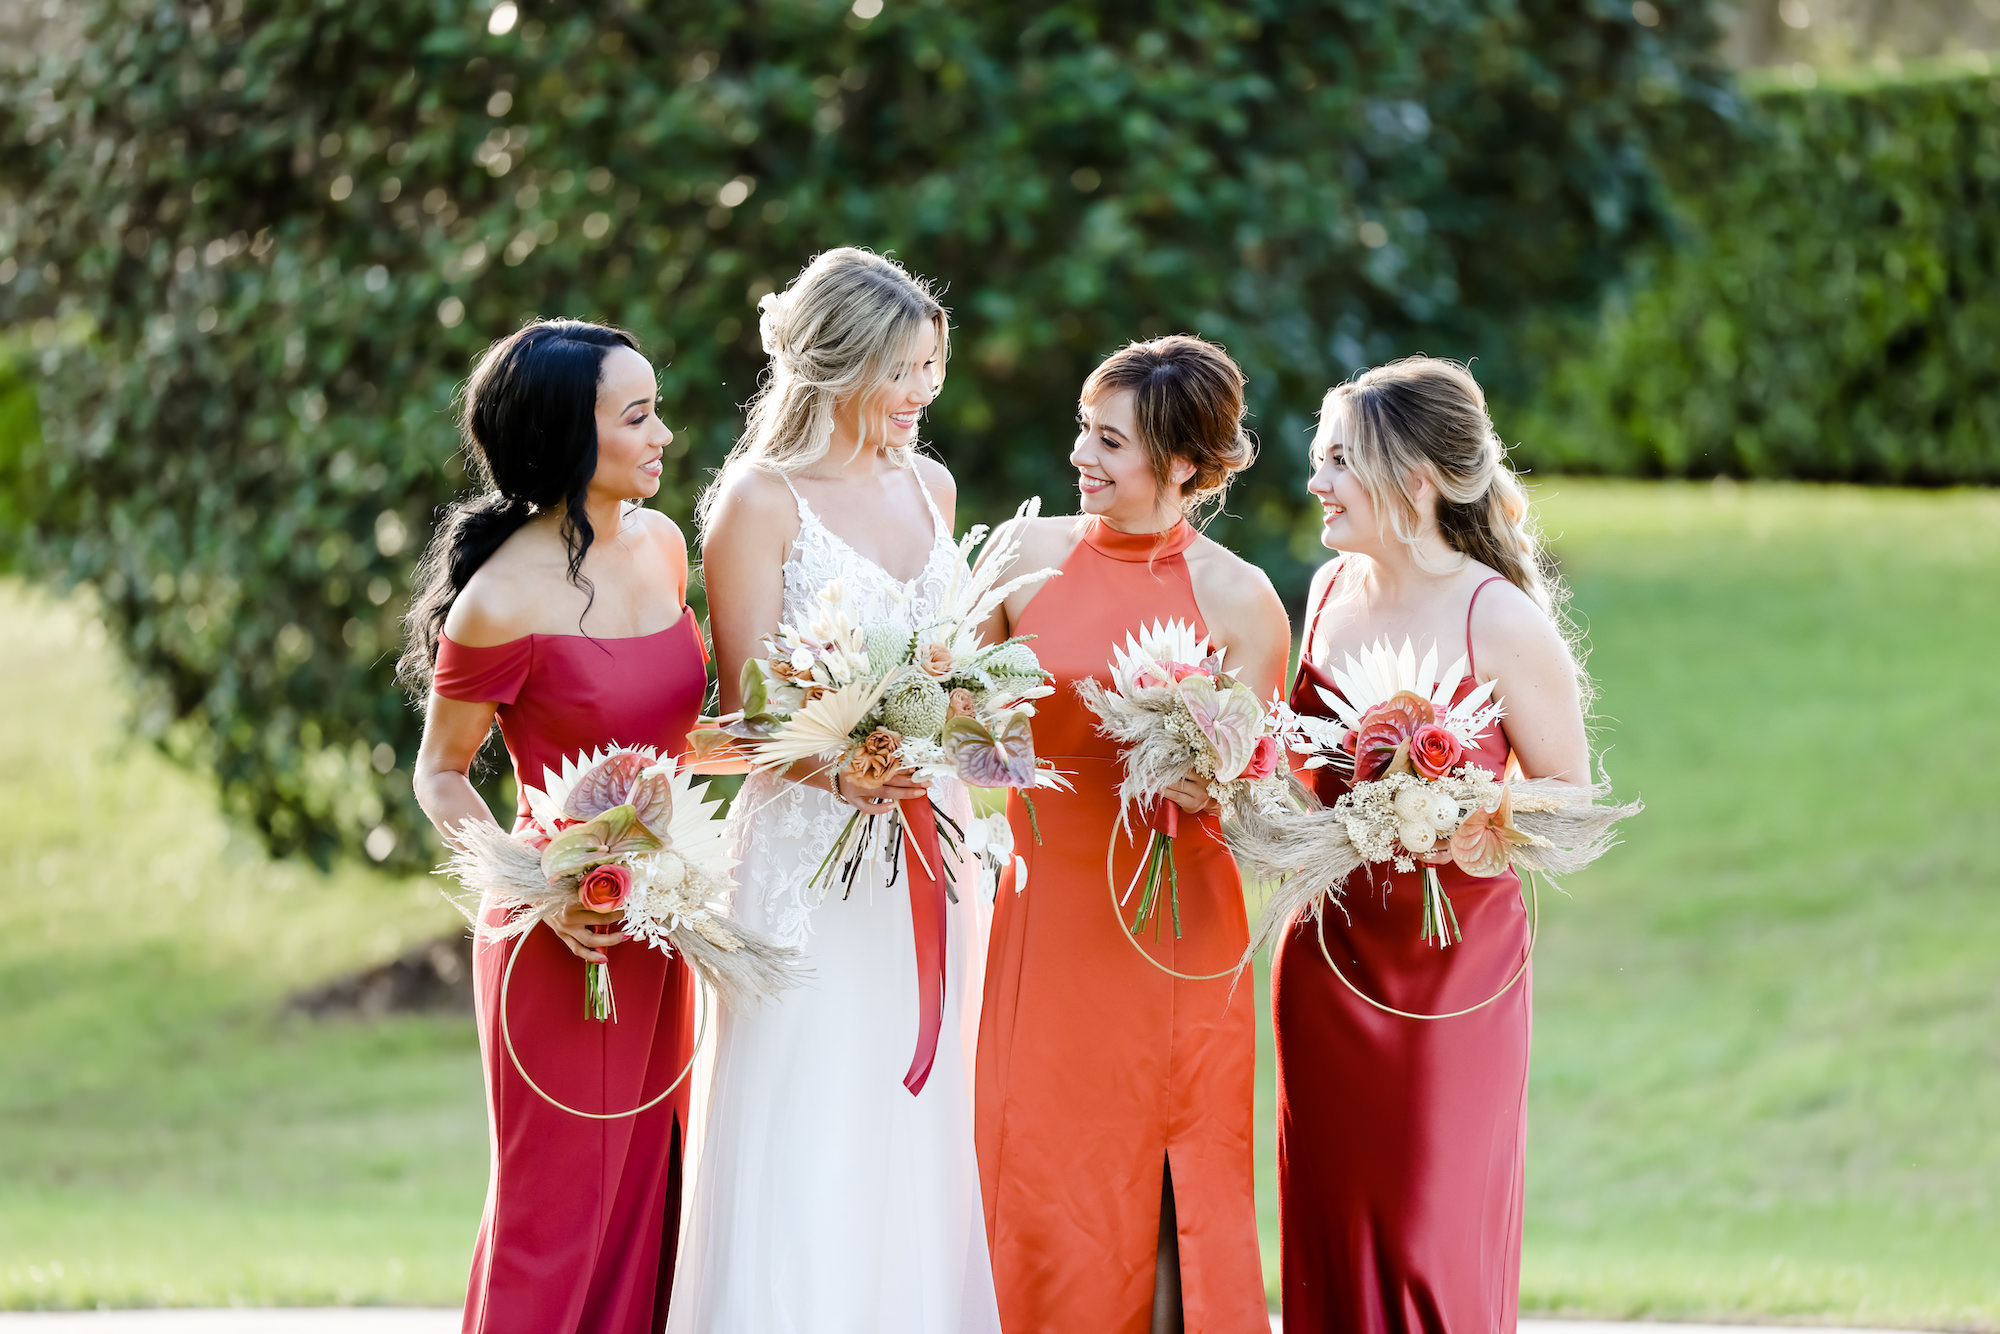 Bridesmaids in Fall Reds and Orange Mix and Match Floor Length Dresses and Unique Circle Boho Wedding Bouquets | Bella Bridesmaids Tampa